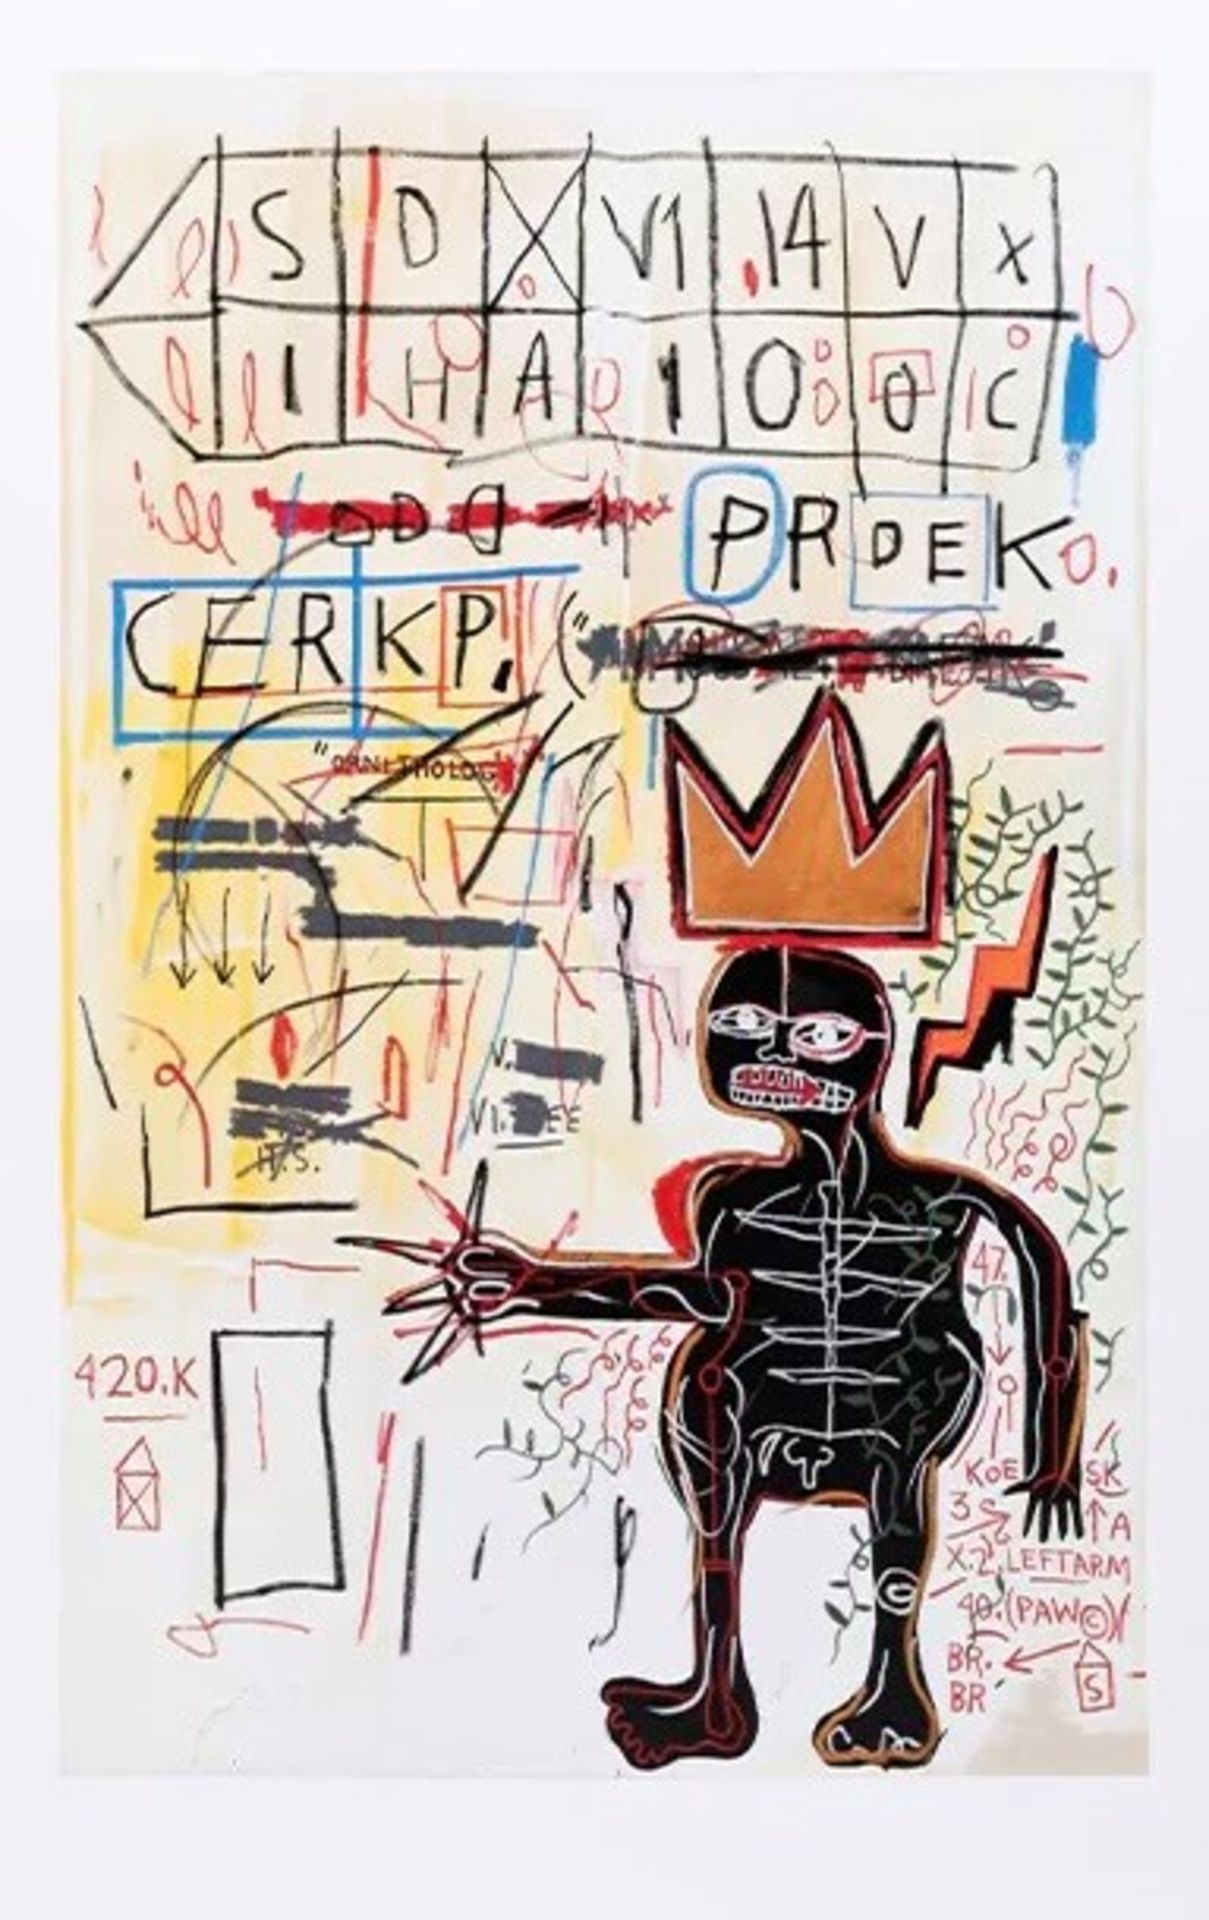 JEAN-MICHEL BASQUIAT With Strings 1983 offfset lithograph